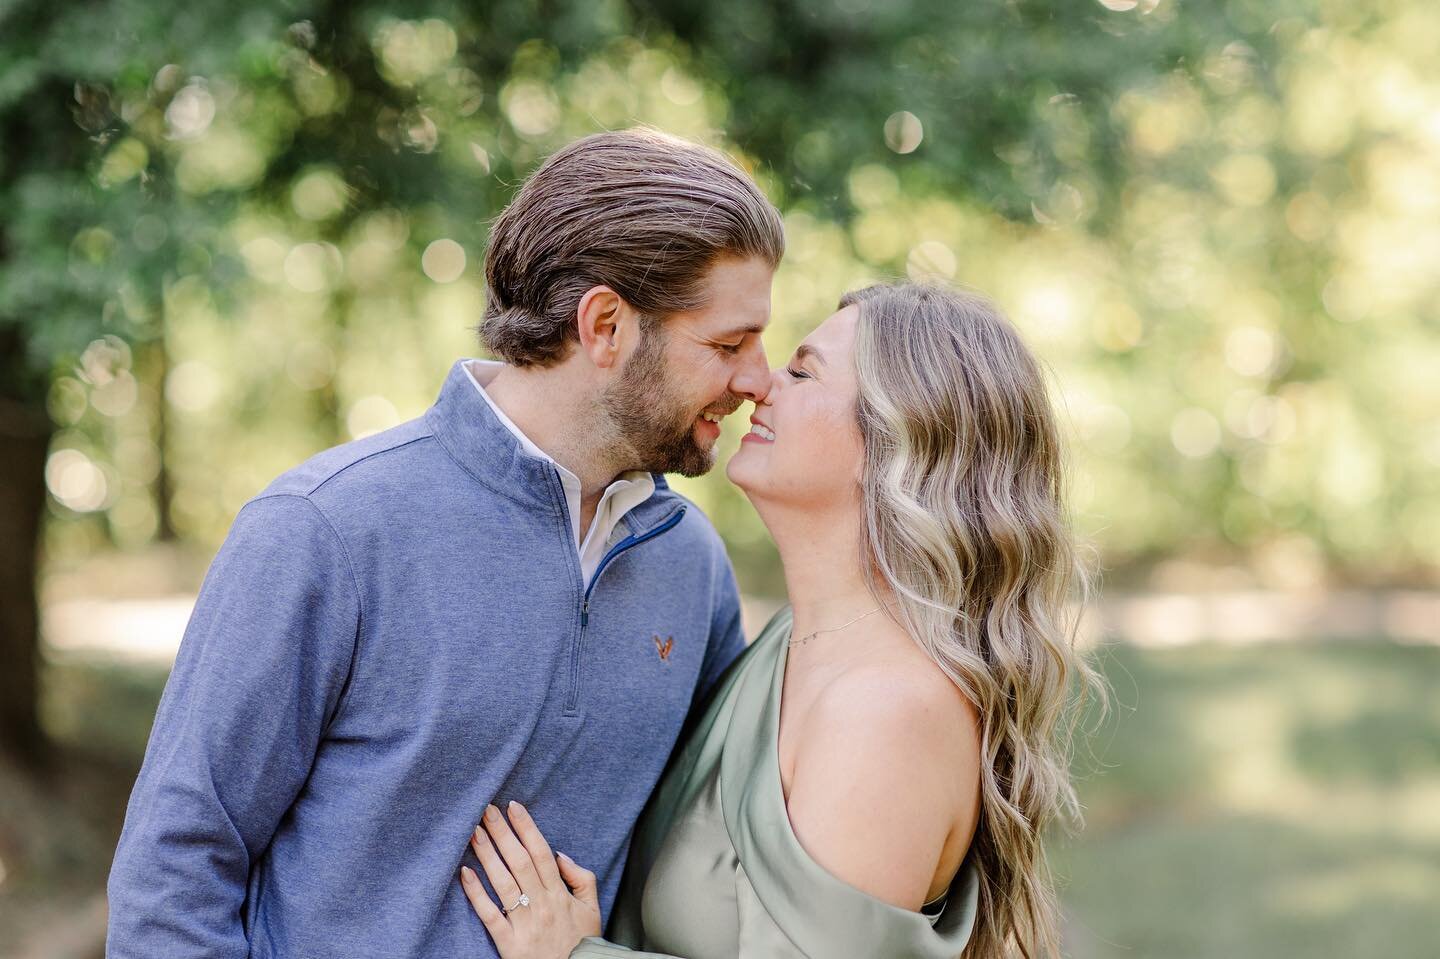 It&rsquo;s engagement season! With so many beautiful sessions coming up, here are 3 tips to have the best engagement session ever!

💍 coordinate colors, don&rsquo;t try to match! Choose a general color palette for you and your partner&rsquo;s outfit